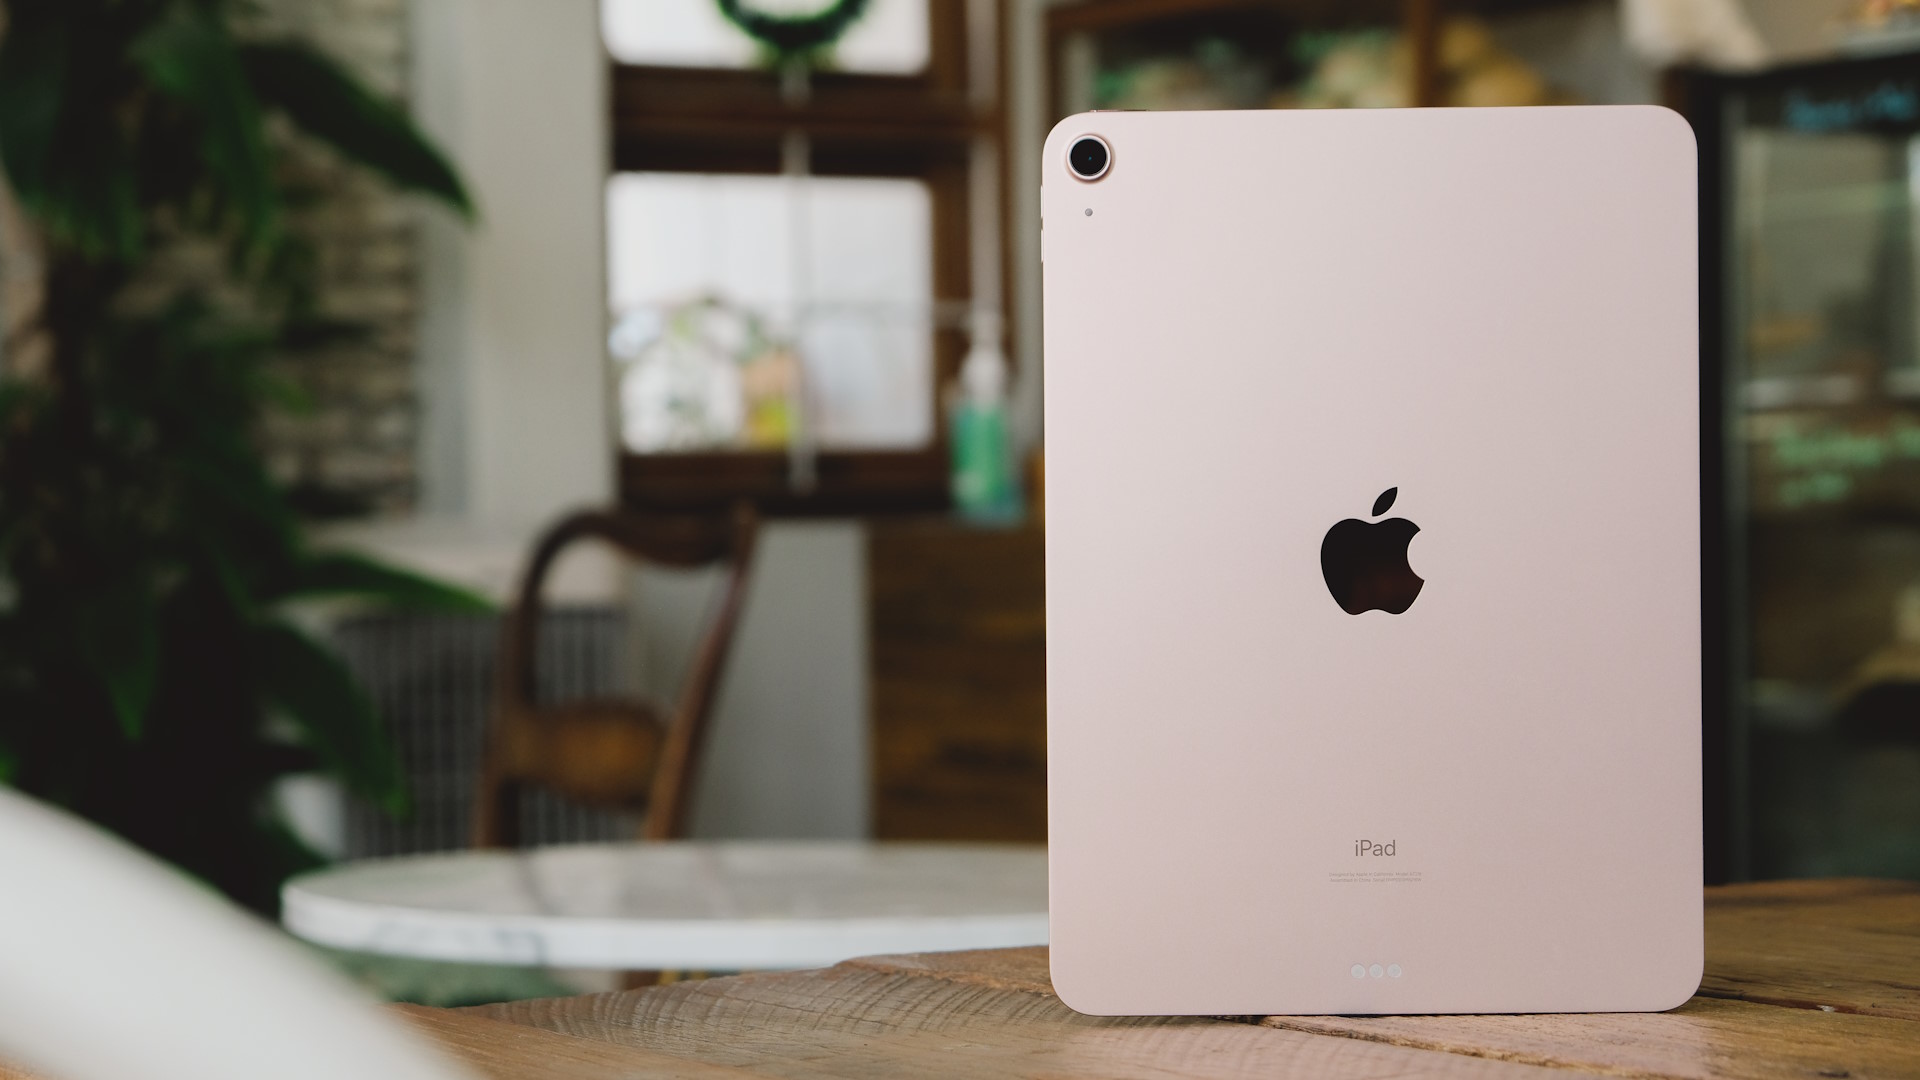 Several iPad models are reportedly coming out in the coming months